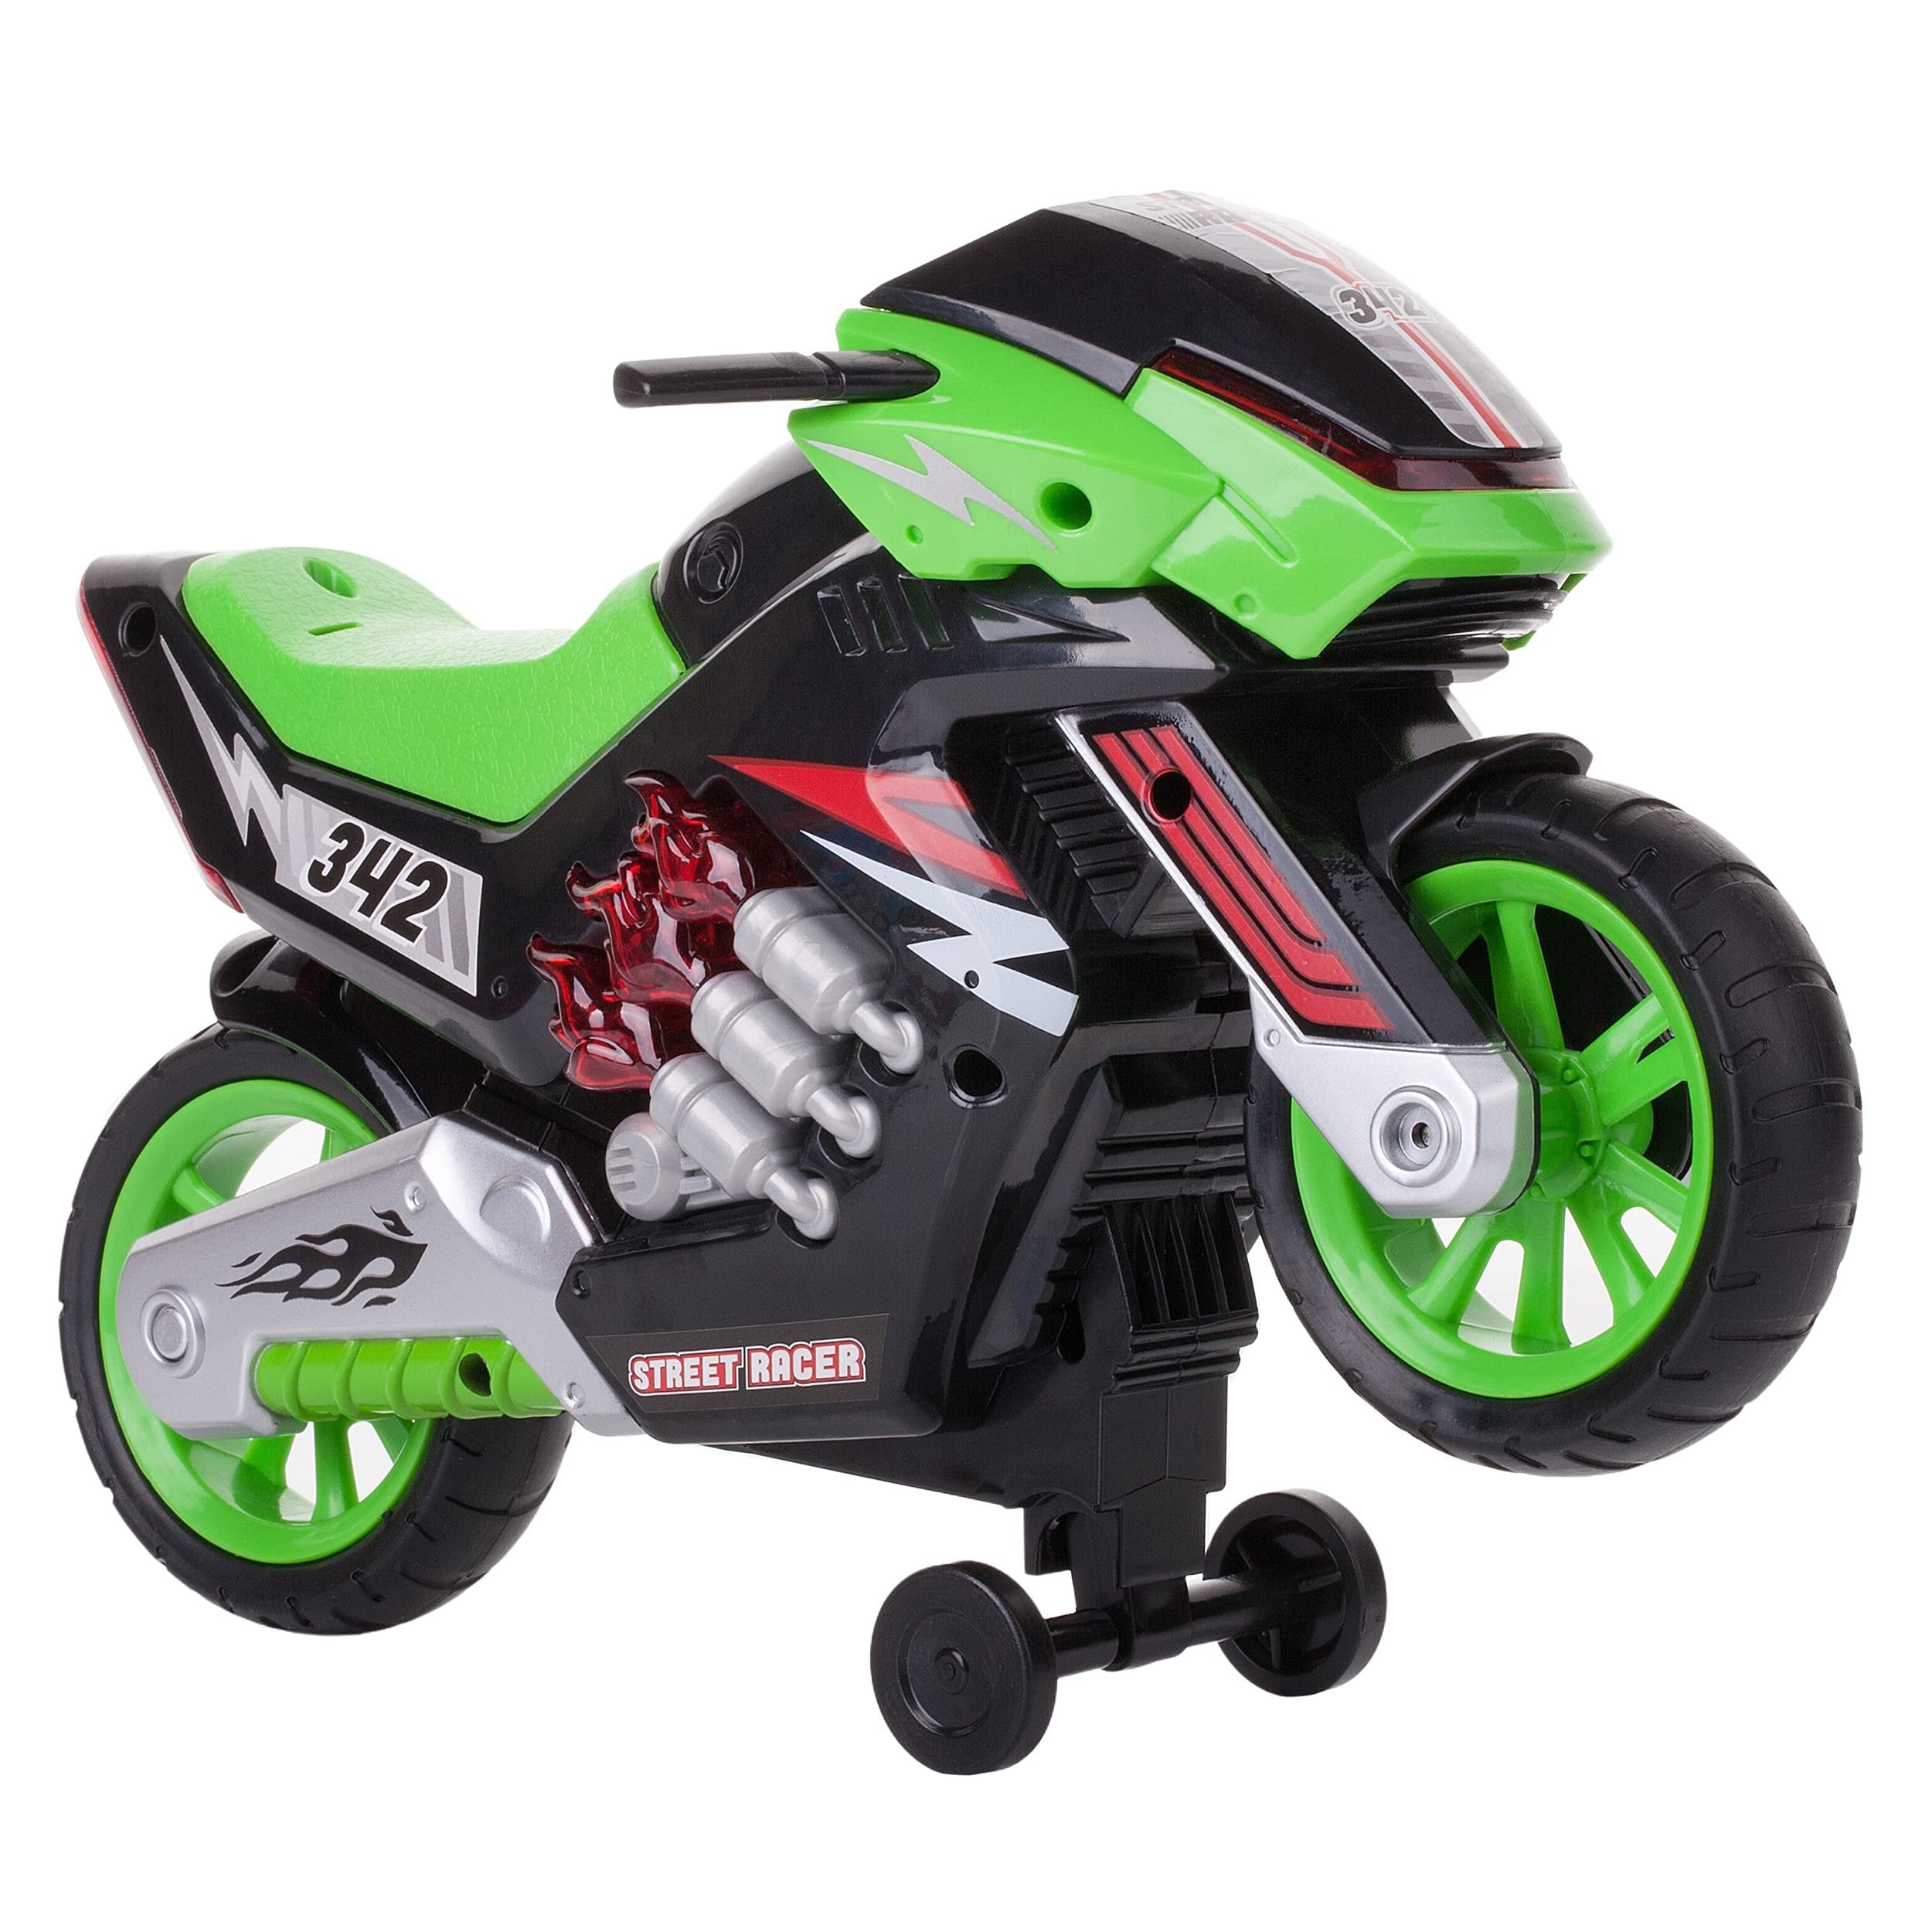 Dazmers Toys Electric Motorcycle Toy with Lights and Sounds - Wheelie Lifters Motorcycle Kids Toddler with Sounds and Lights for Kids - Green - Dirtbike Toys for Boys